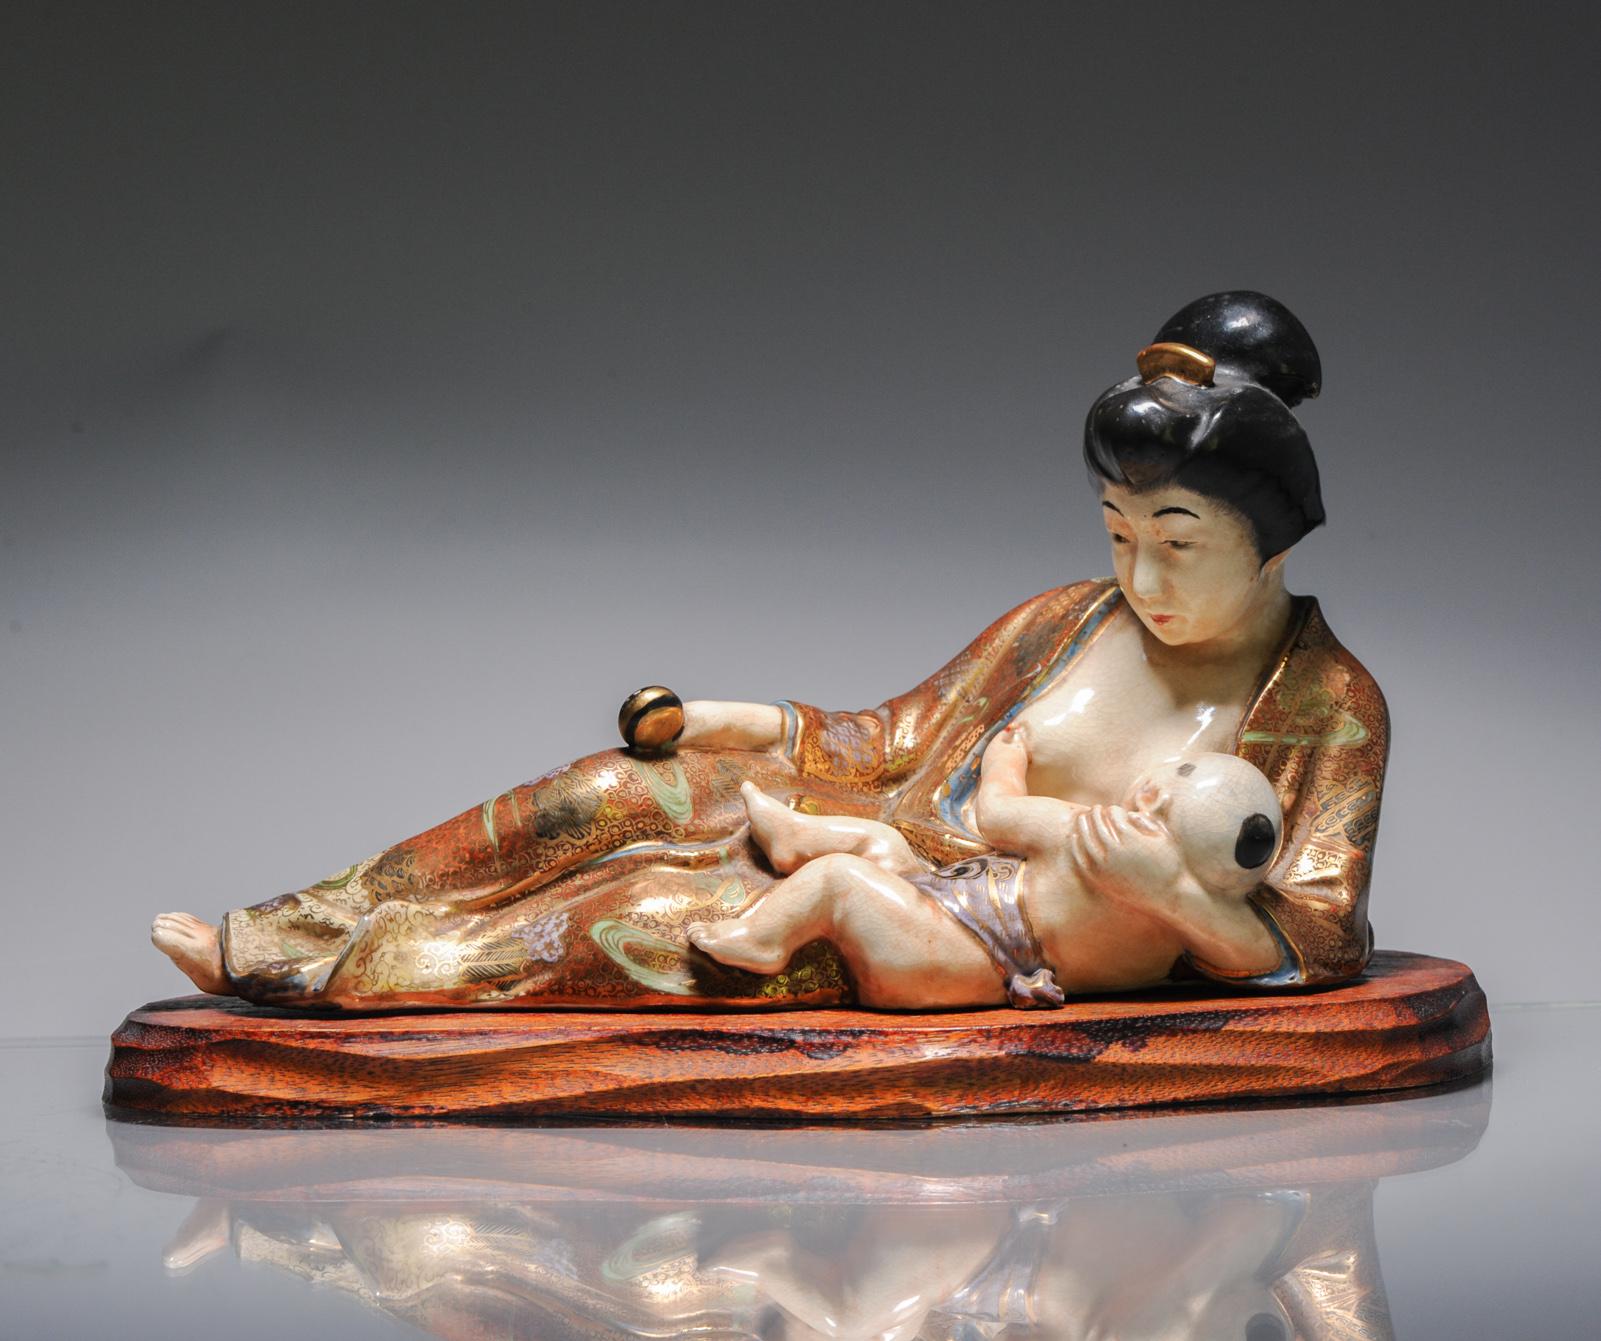 Description

A Japanese Satsuma statue, Taisho or early Showa period

Marked on base: ?? Omura.

Condition
Overall Condition Good, but 1 restored break to the robe of the mother. Size 27.5cm x 16 x 15.8cm

Period
Taisho Periode (1912-1926).